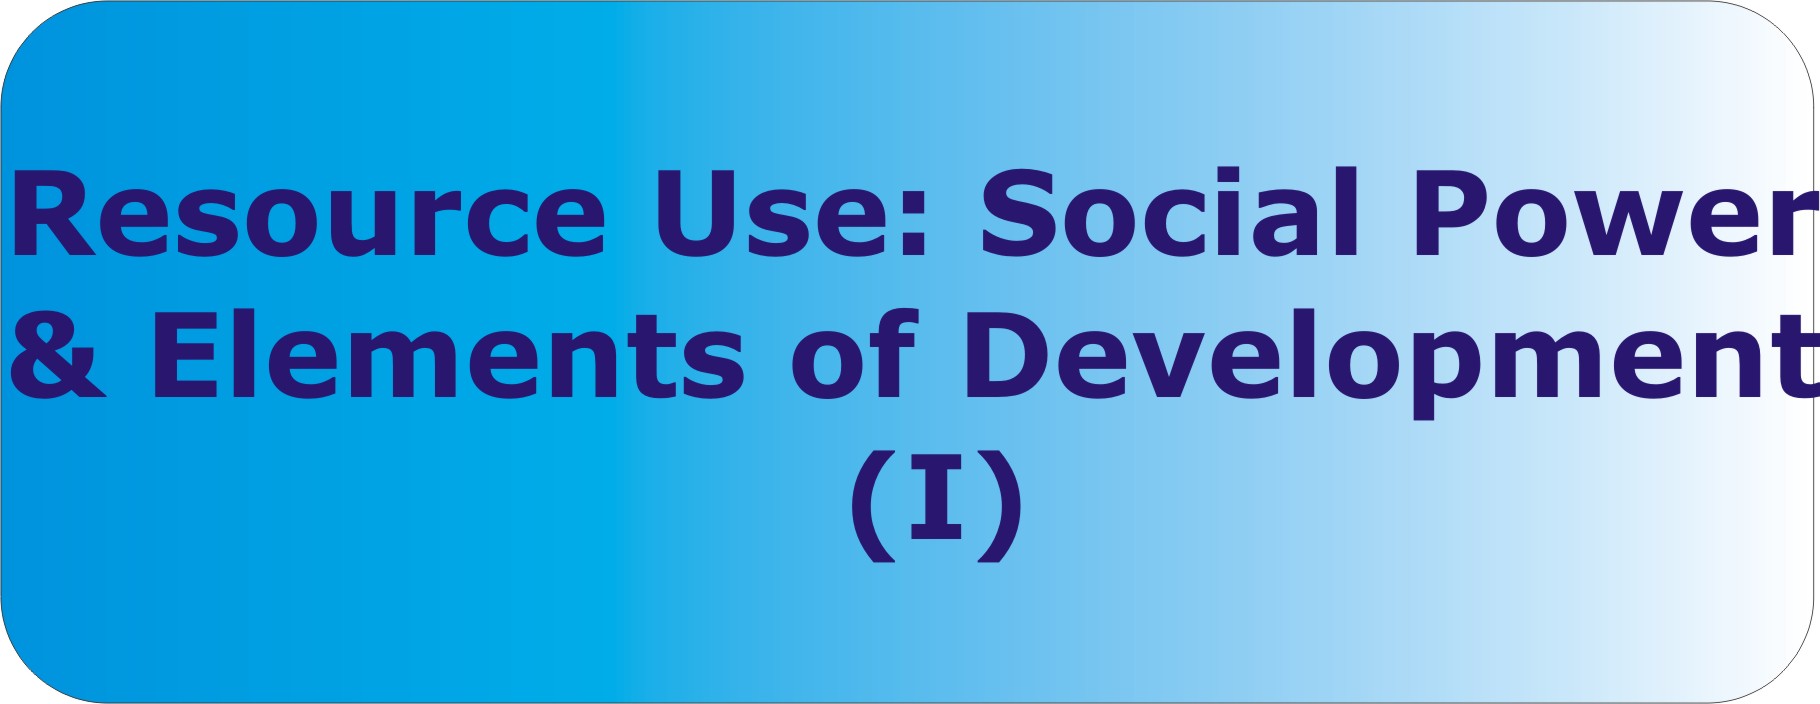 Resource Use: Social Power and Elements of Development-I